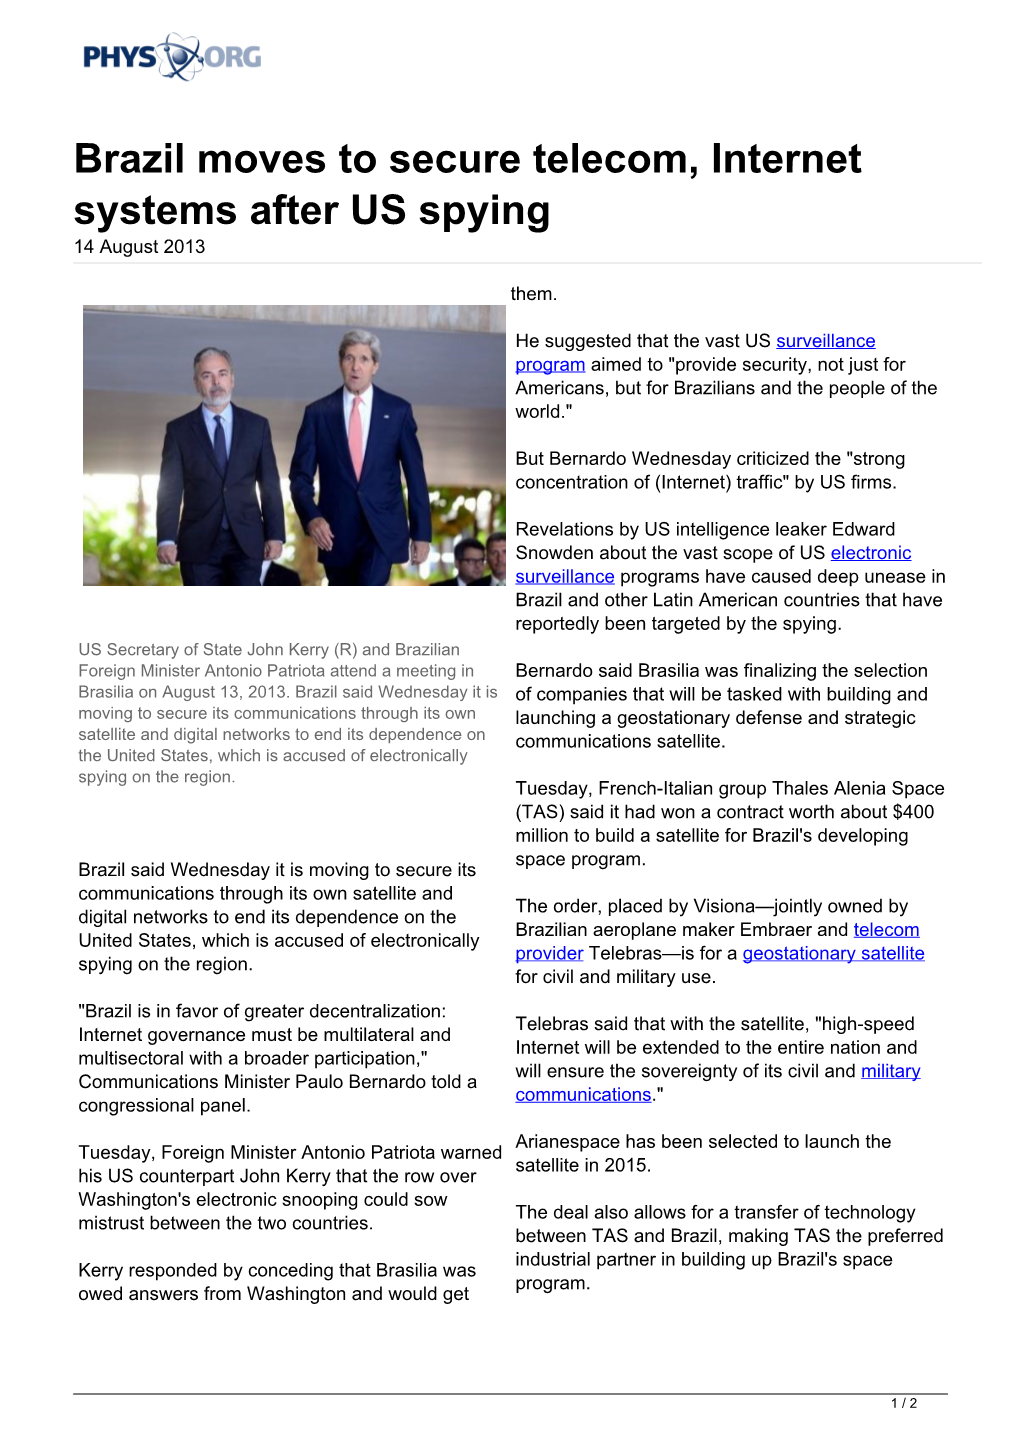 Brazil Moves to Secure Telecom, Internet Systems After US Spying 14 August 2013